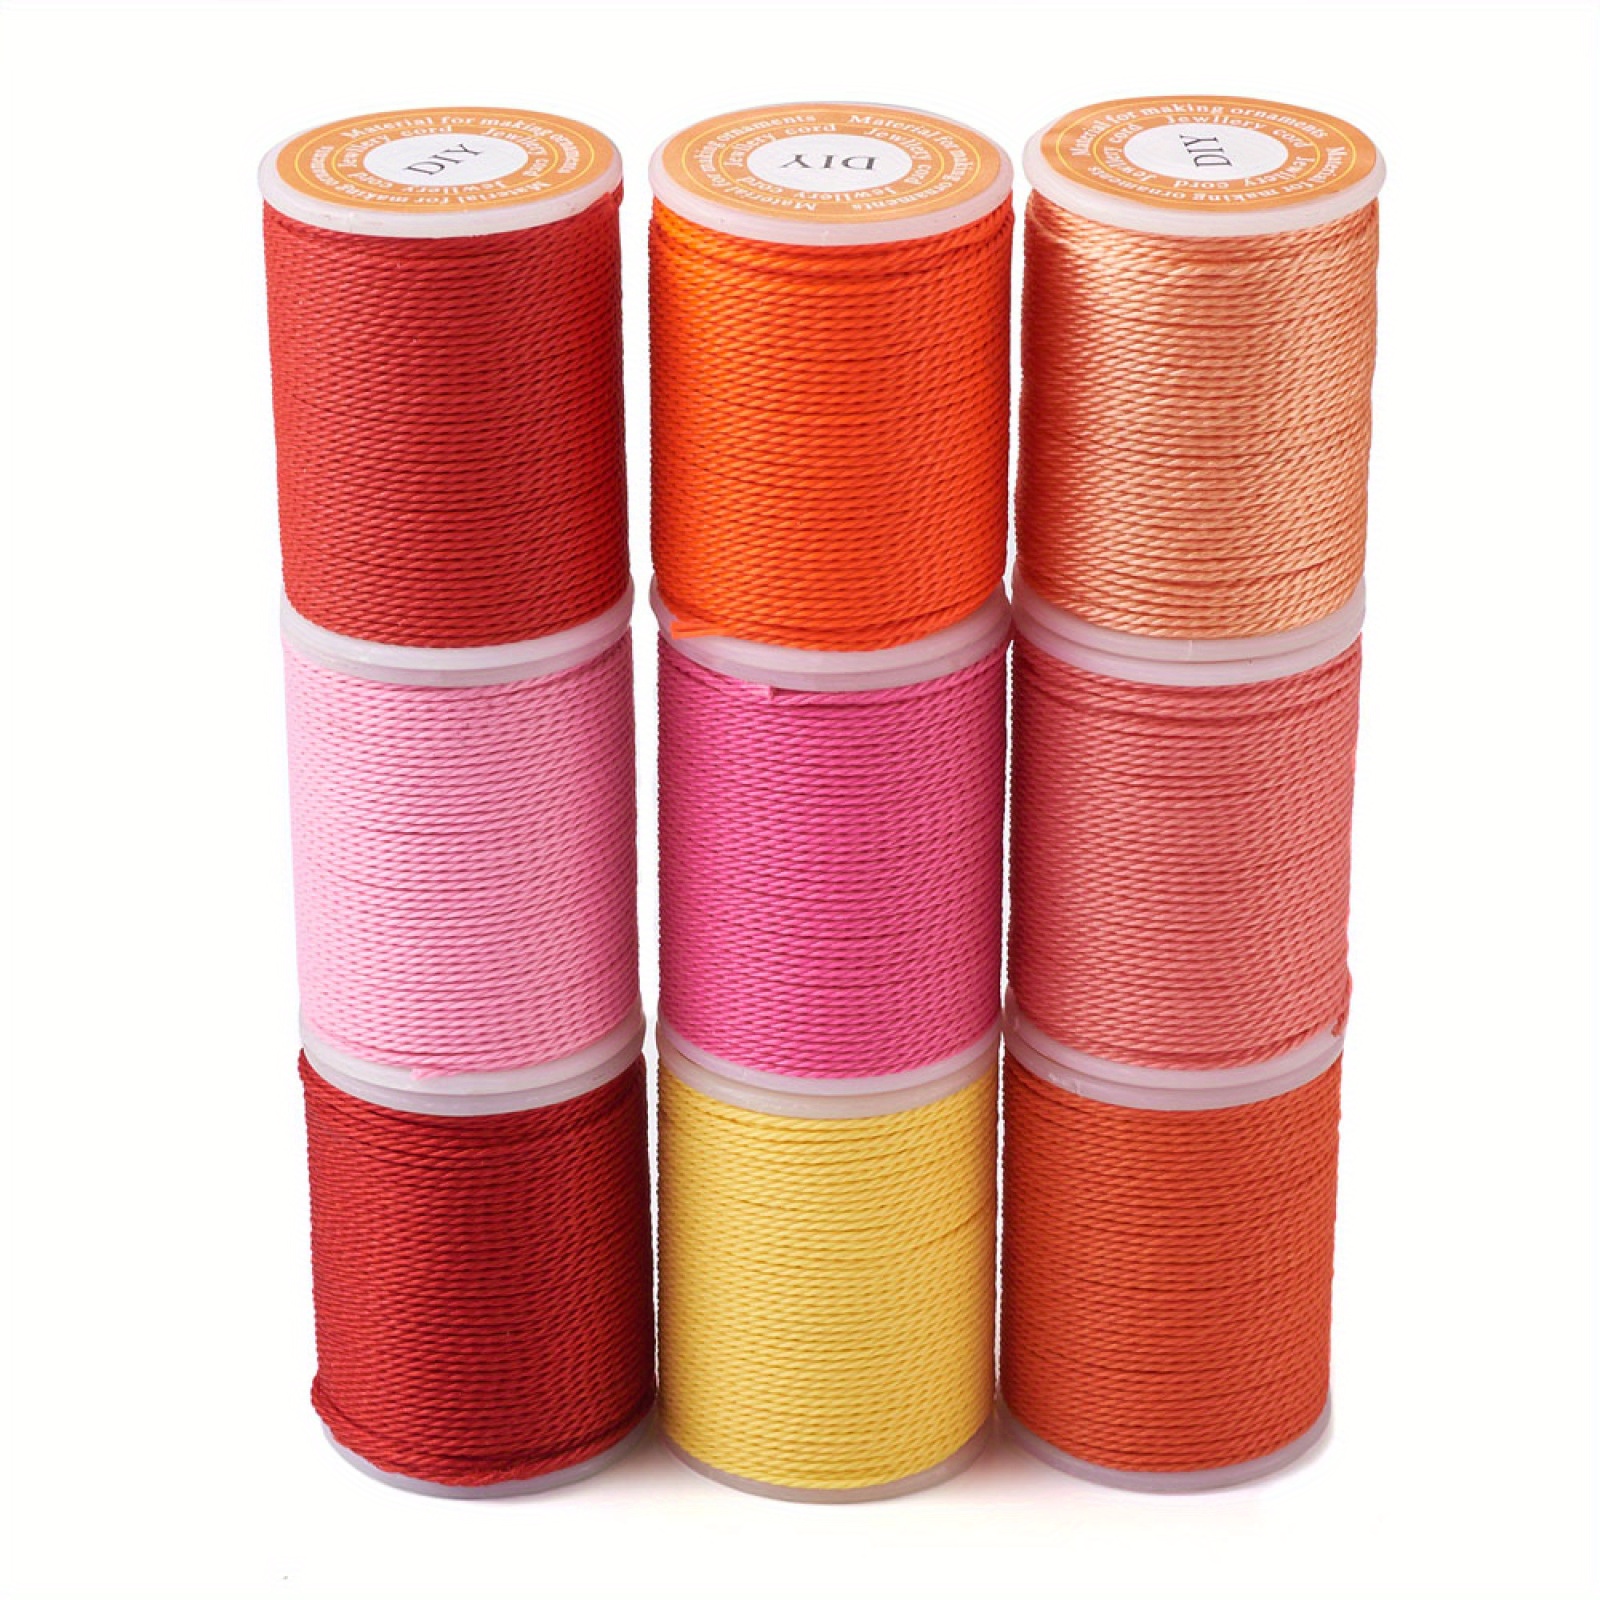 11m/roll 9rolls Waxed Polyester Cord Twisted Cord Mixed Color 1mm